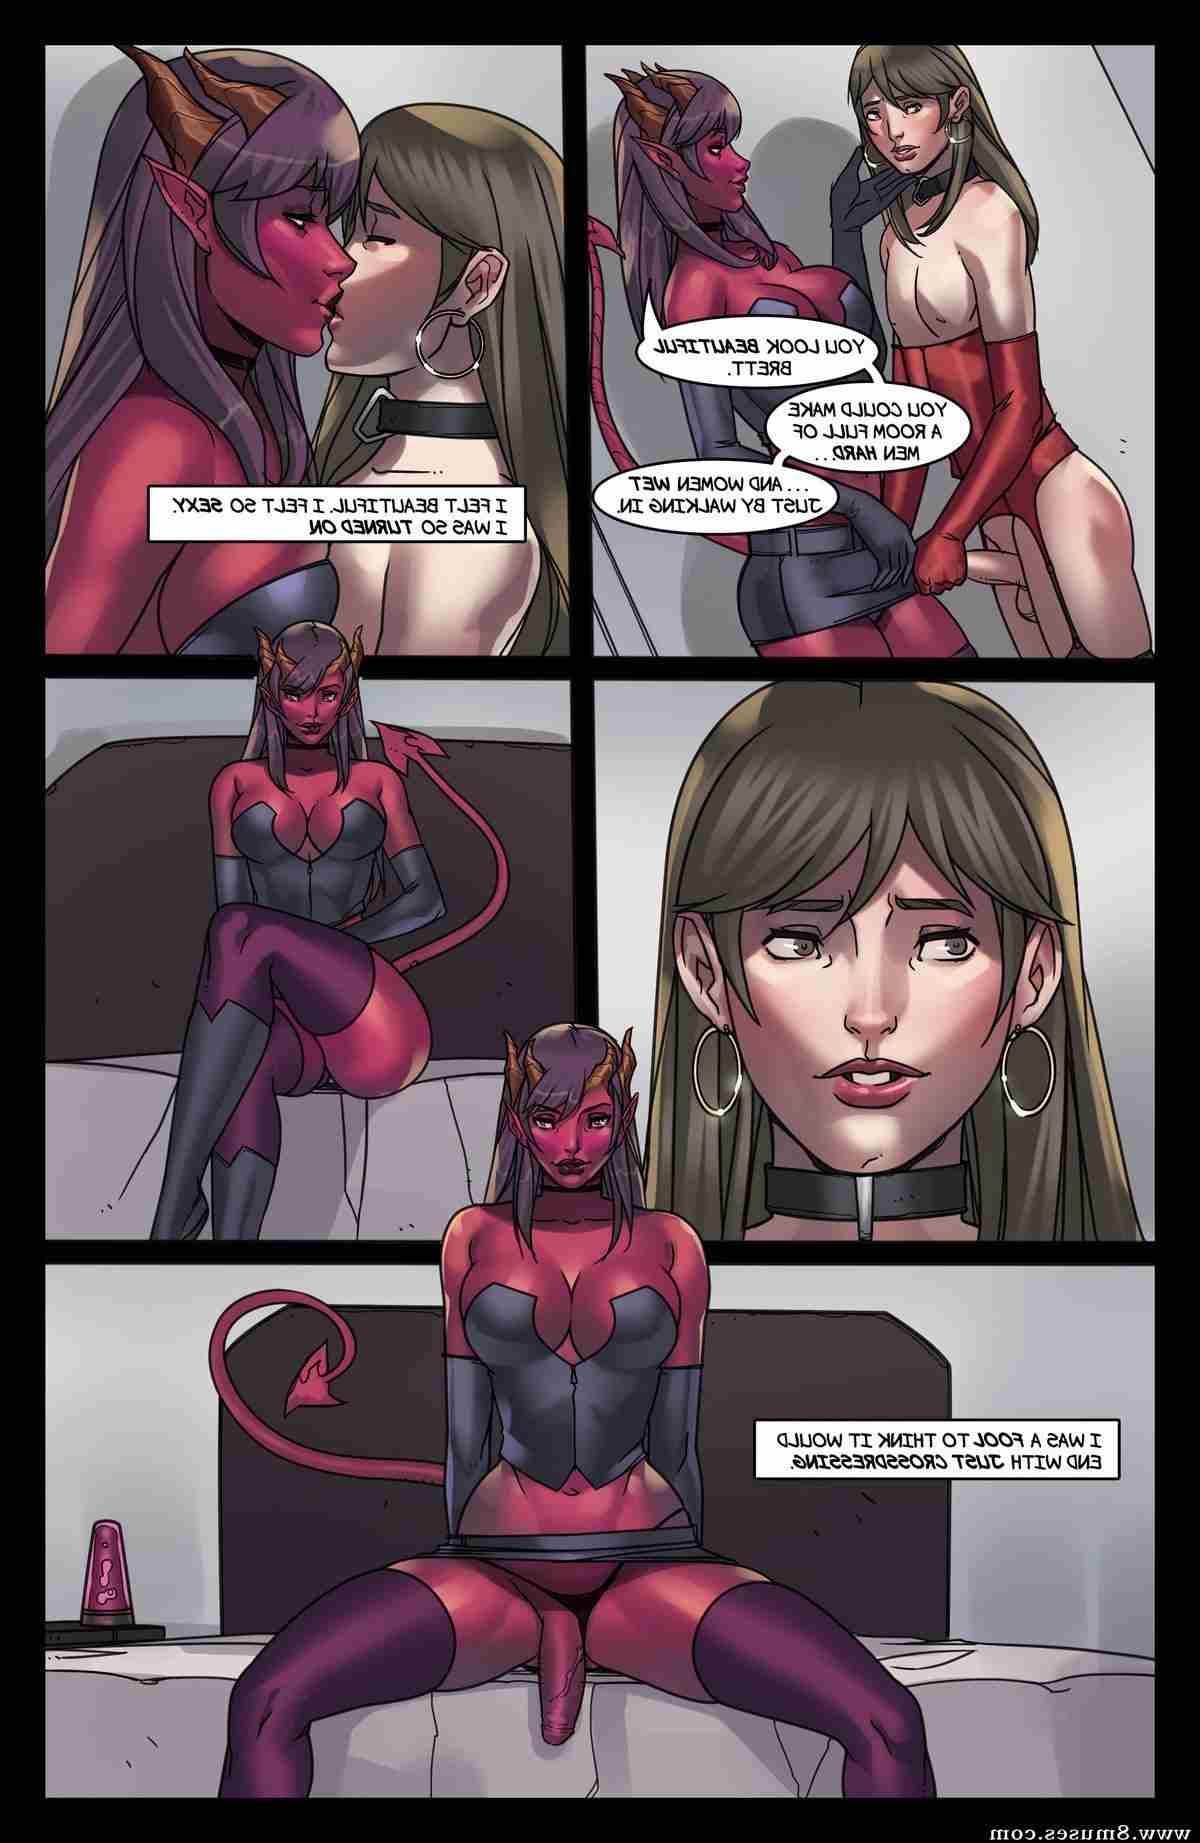 Various-Authors/Pop-Lee/The-Succubus-Sub The_Succubus_Sub__8muses_-_Sex_and_Porn_Comics_6.jpg